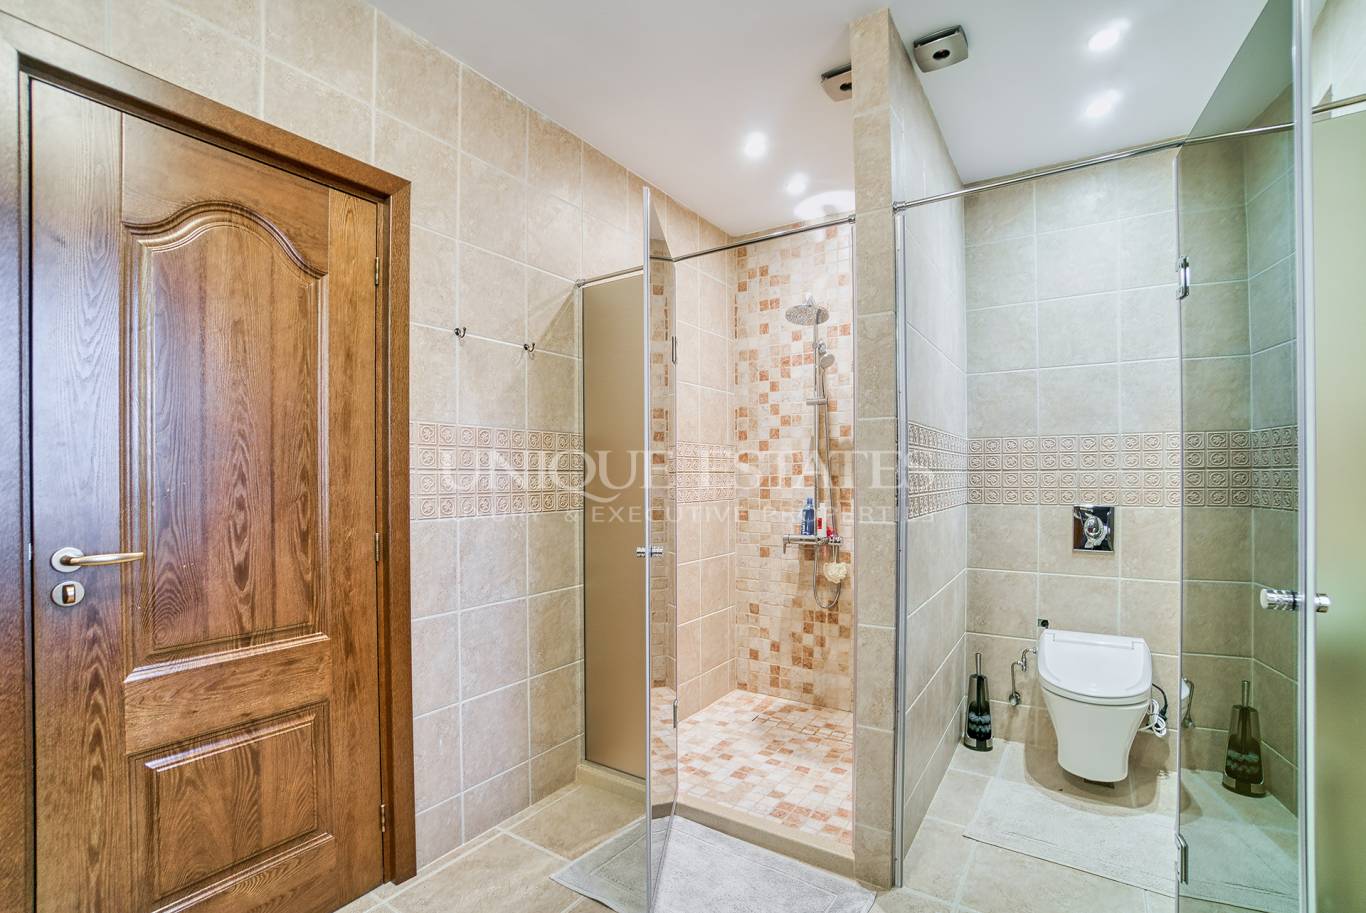 House for sale in Sofia, Natiolan park Vitosha with listing ID: K14049 - image 13